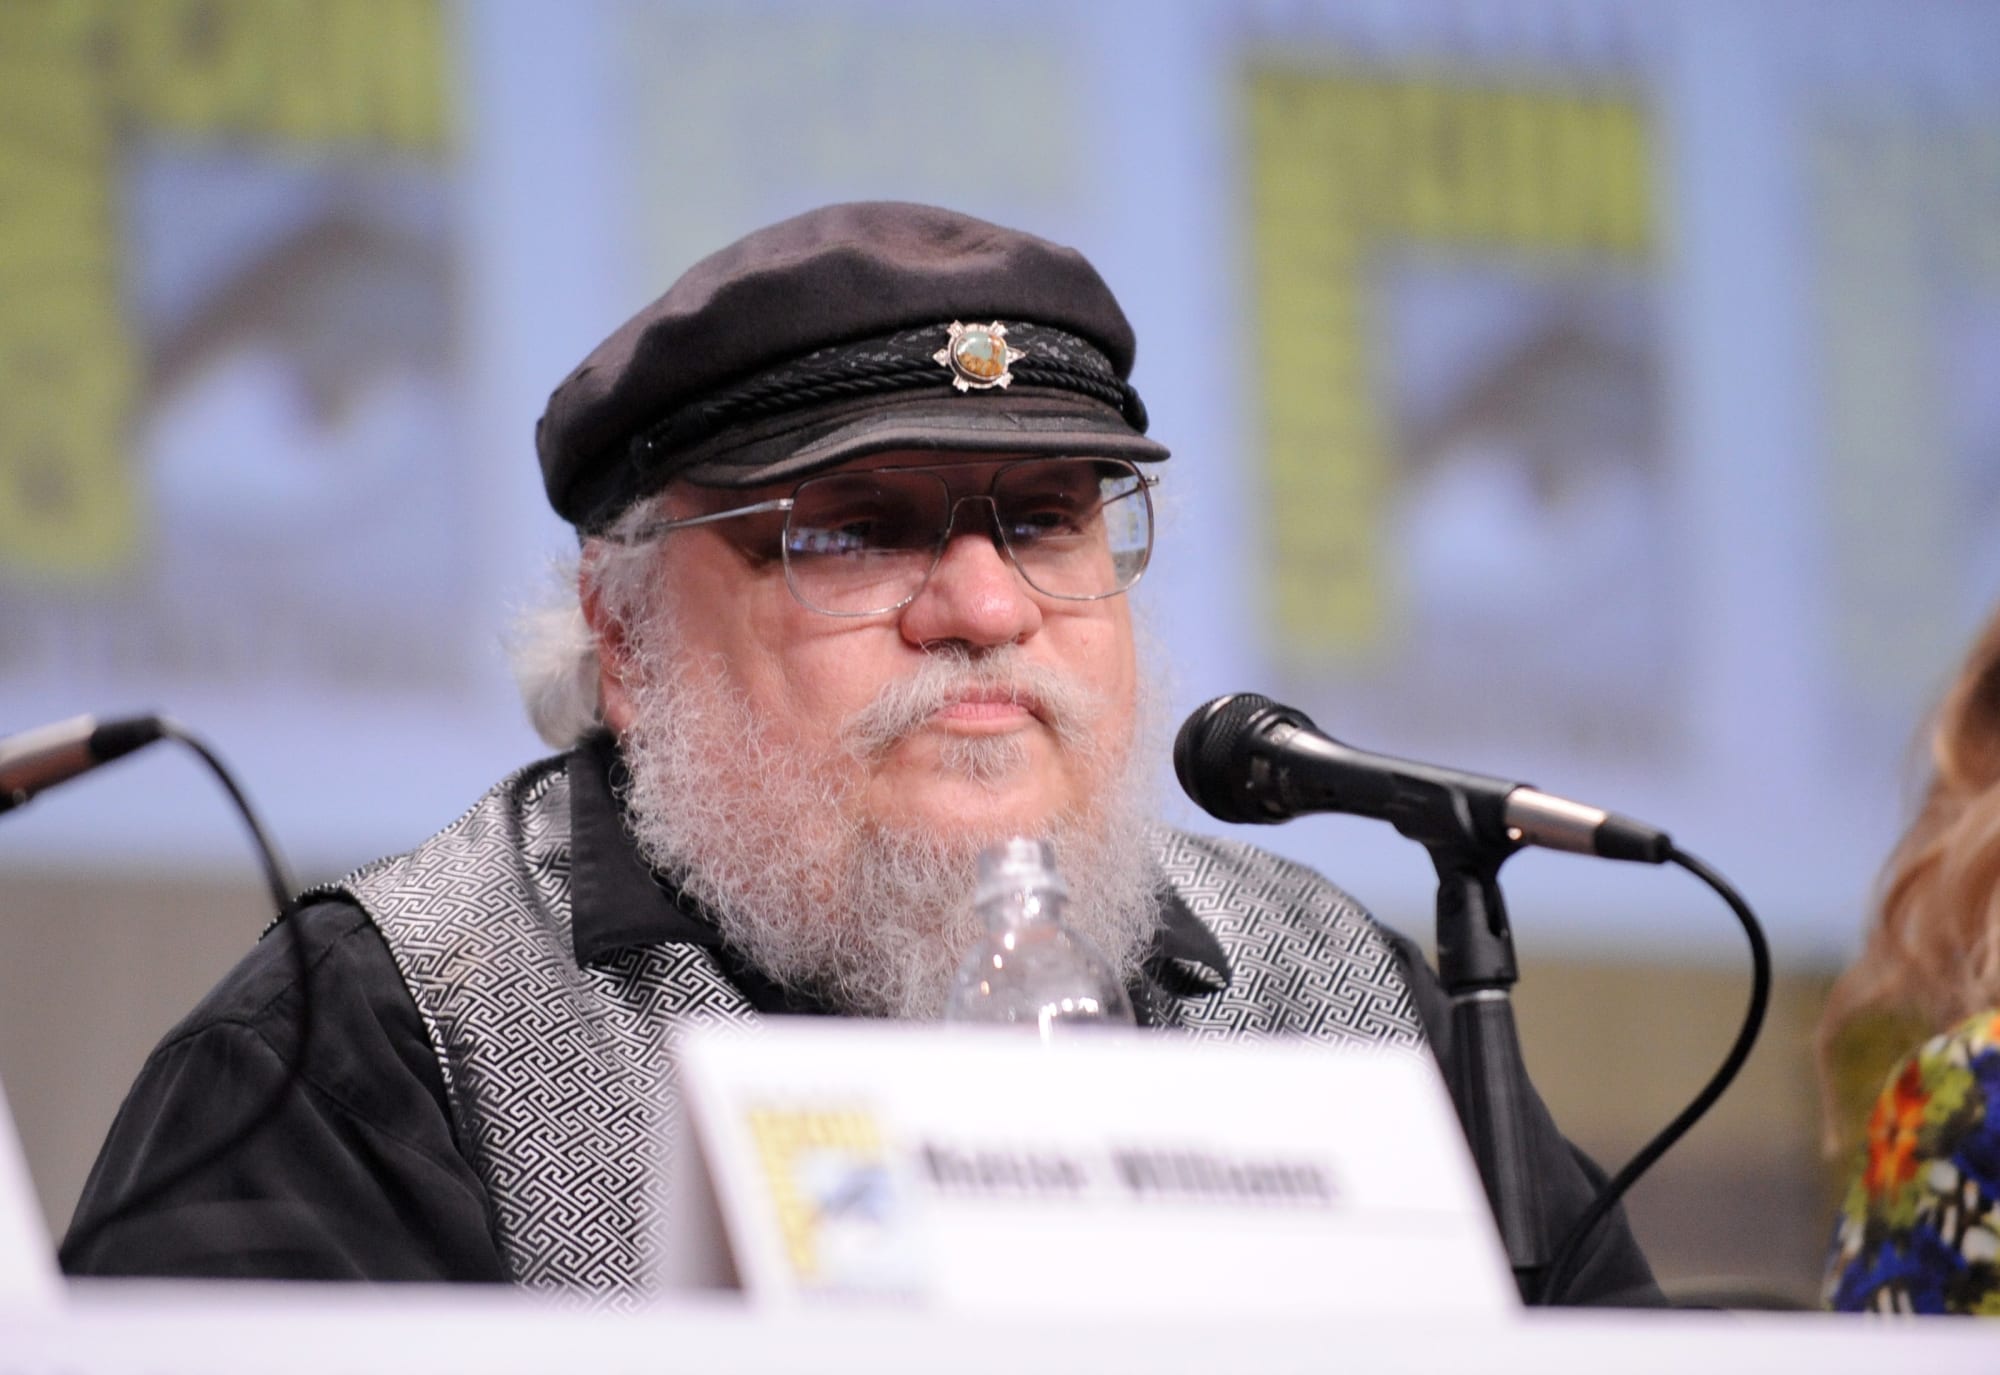 George R.R. Martin: The Winds of Winter is “three quarters of the way done”